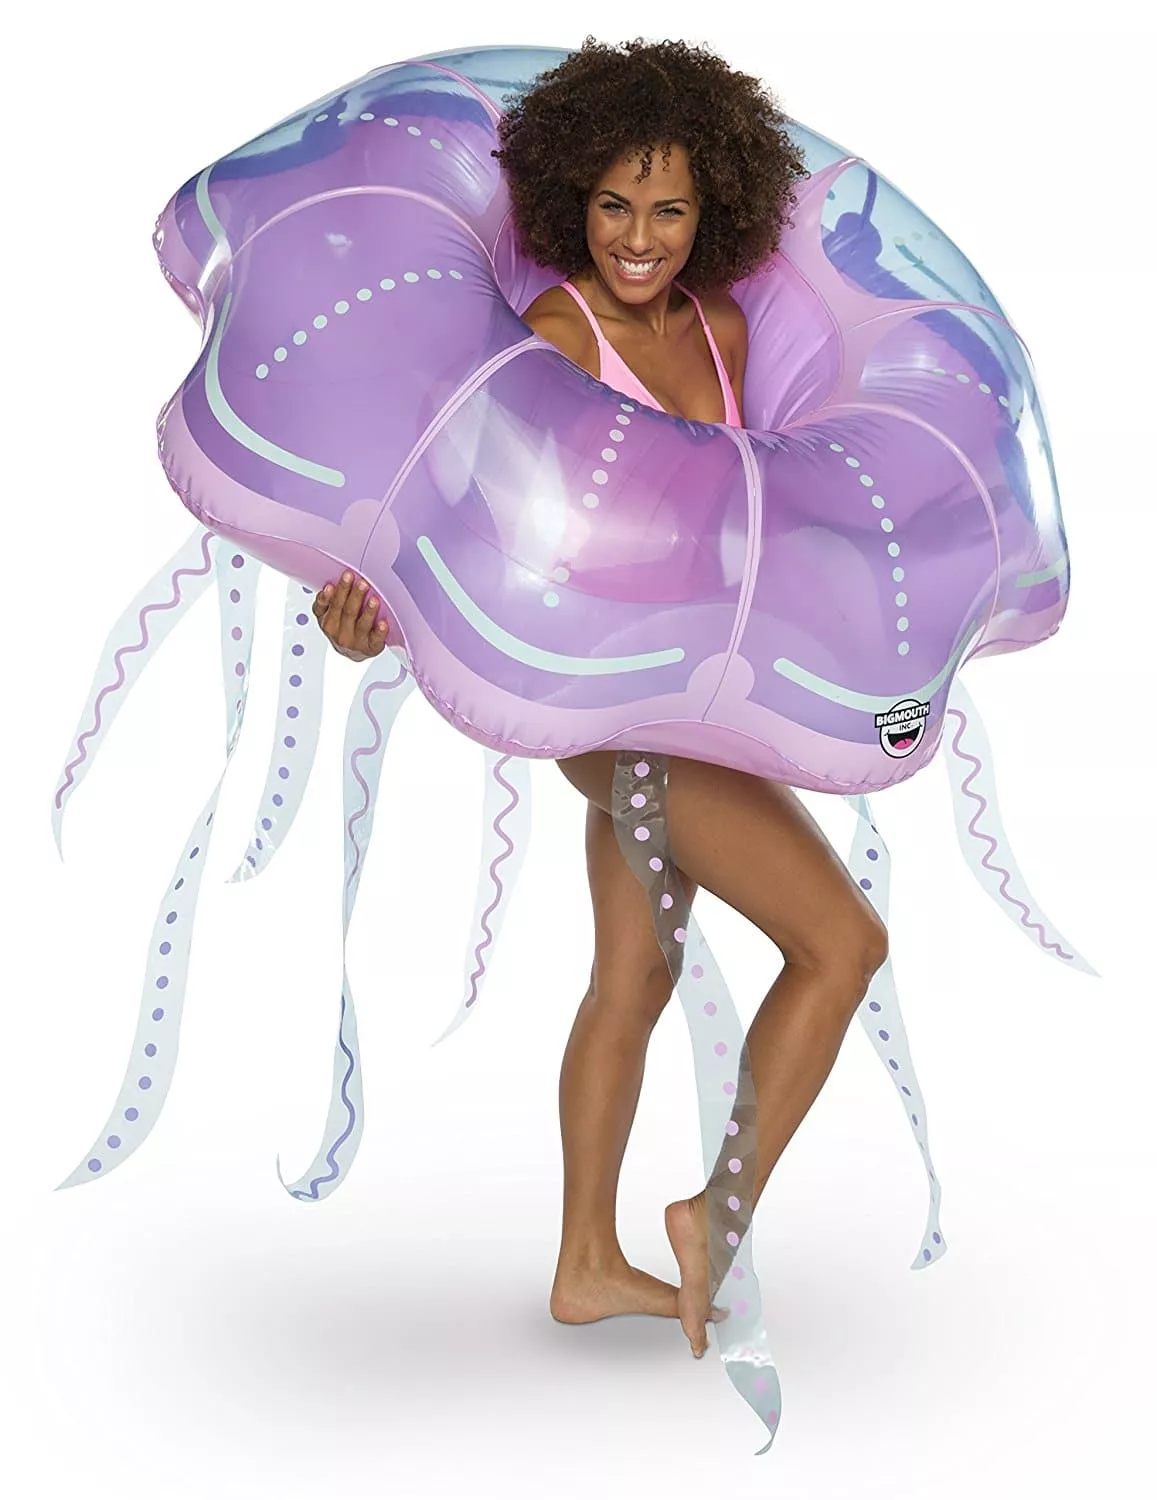 Cool Pool Float for Adults 2018: Purple/Pink Jellyfish Raft